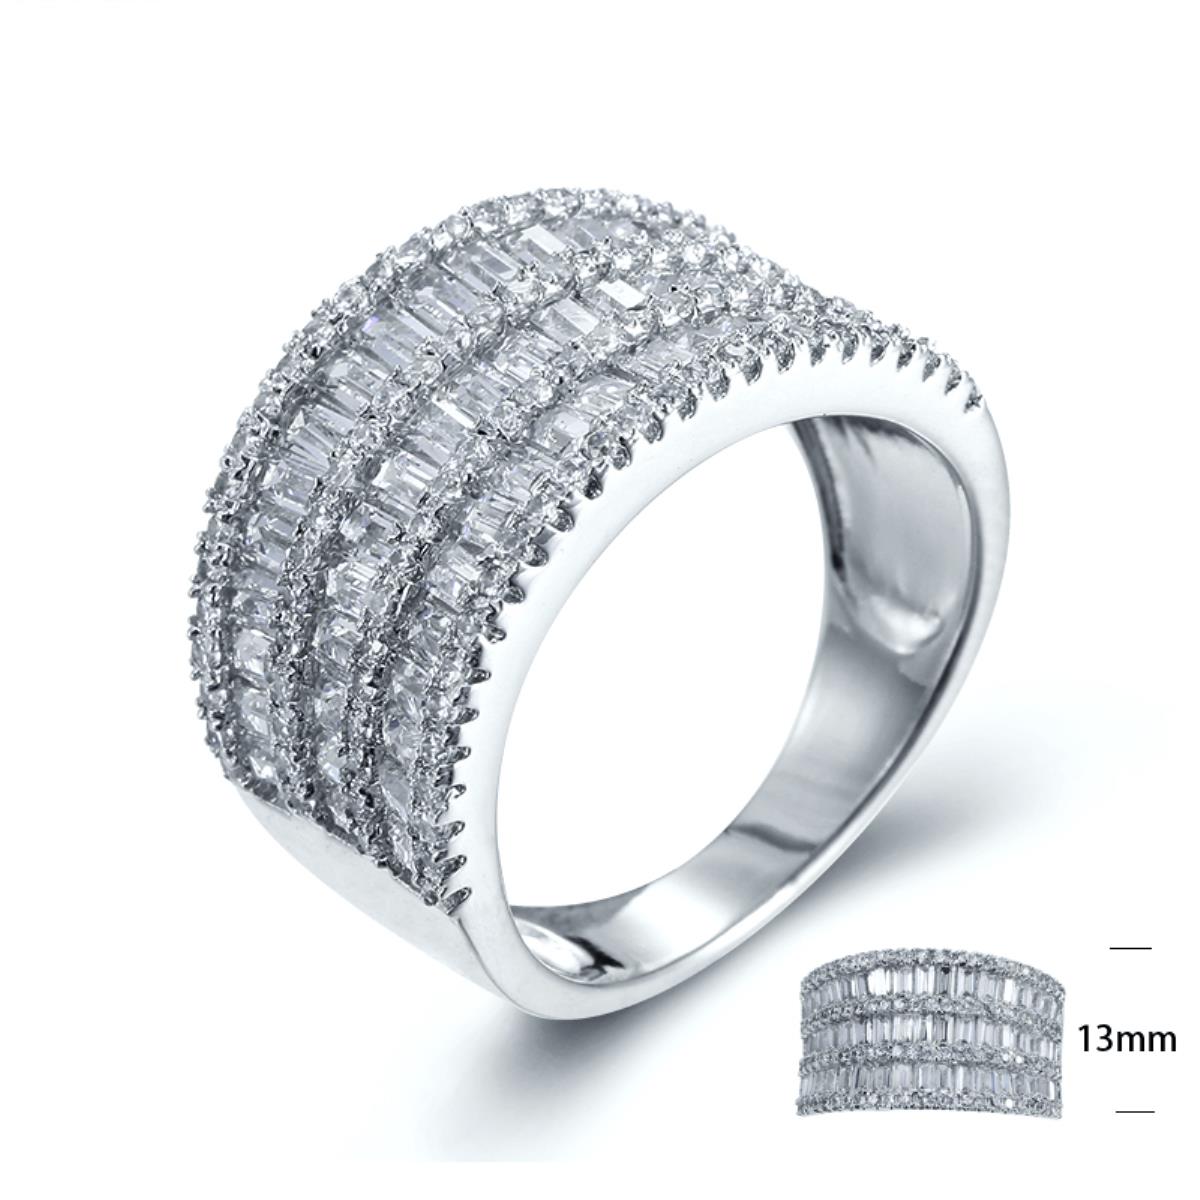 Sterling Silver Rhodium Pave Baguette Cocktail Fashion Ring